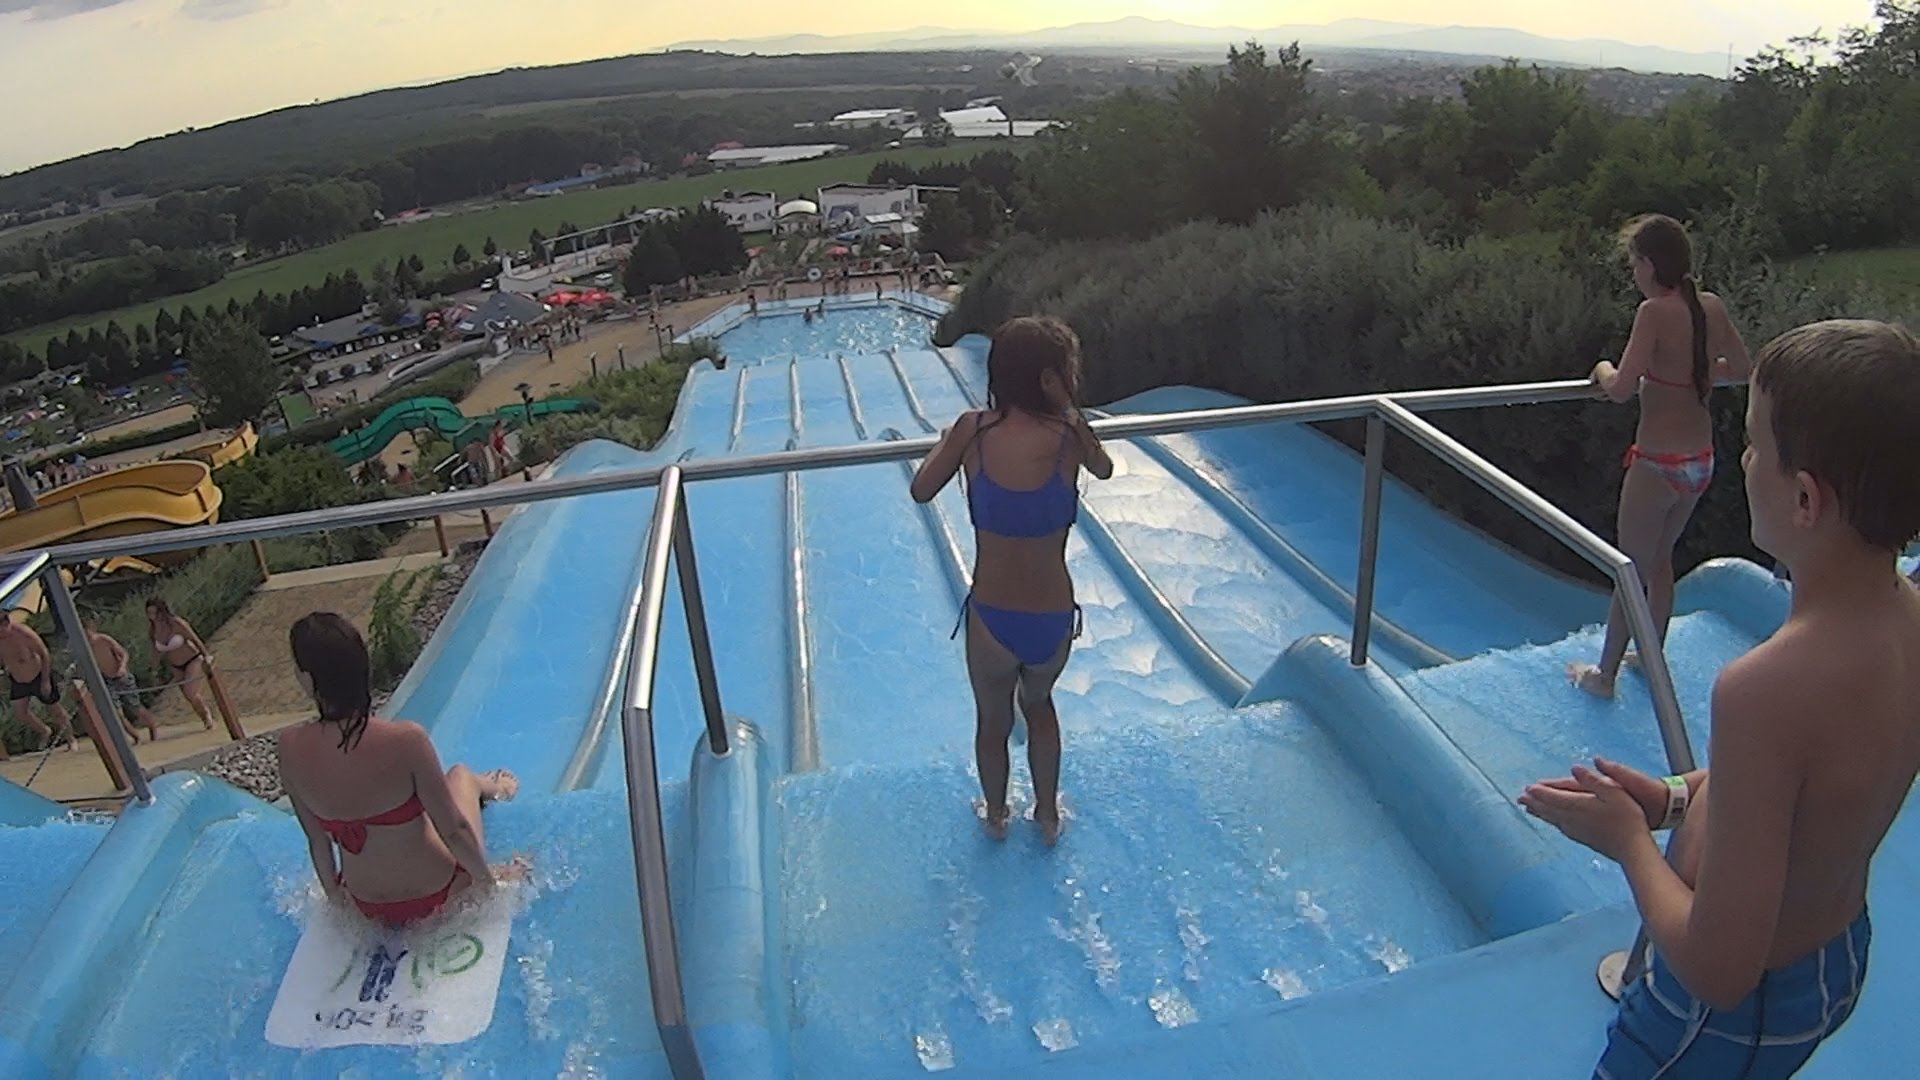 Scary Blue Water Slide at Aquaréna - YouTube